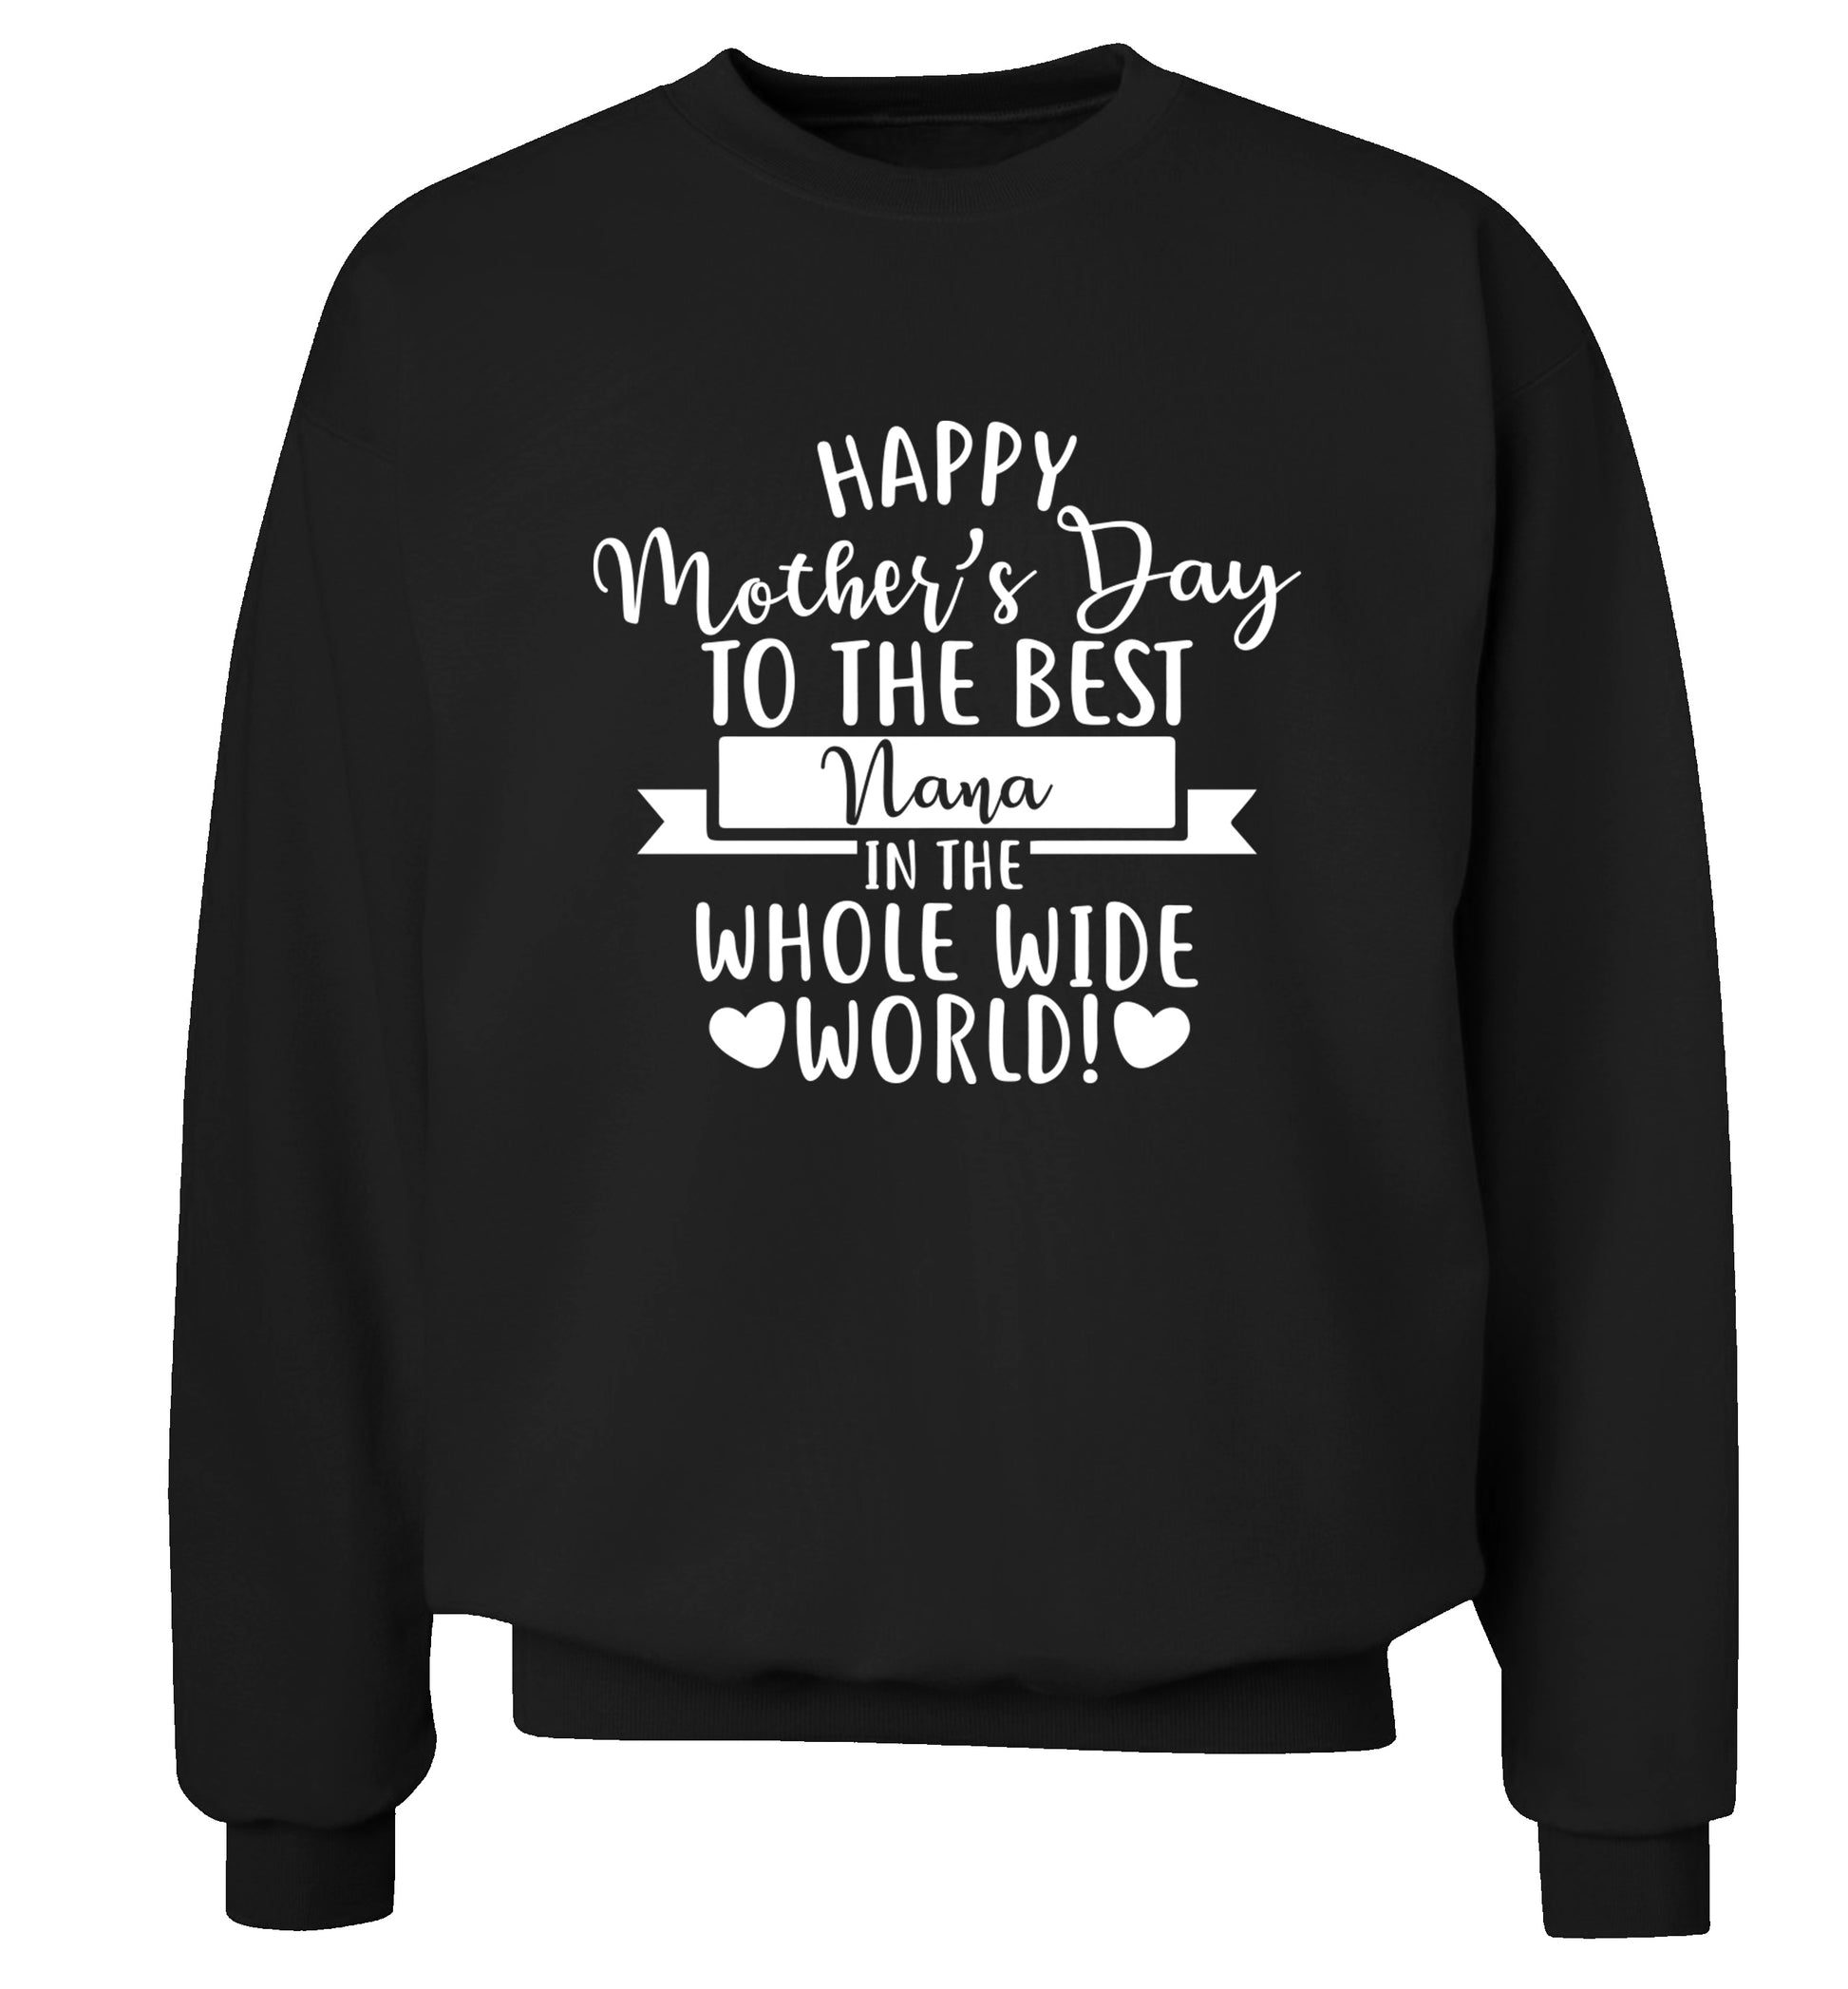 Happy mother's day to the best Nana in the world Adult's unisex black Sweater 2XL